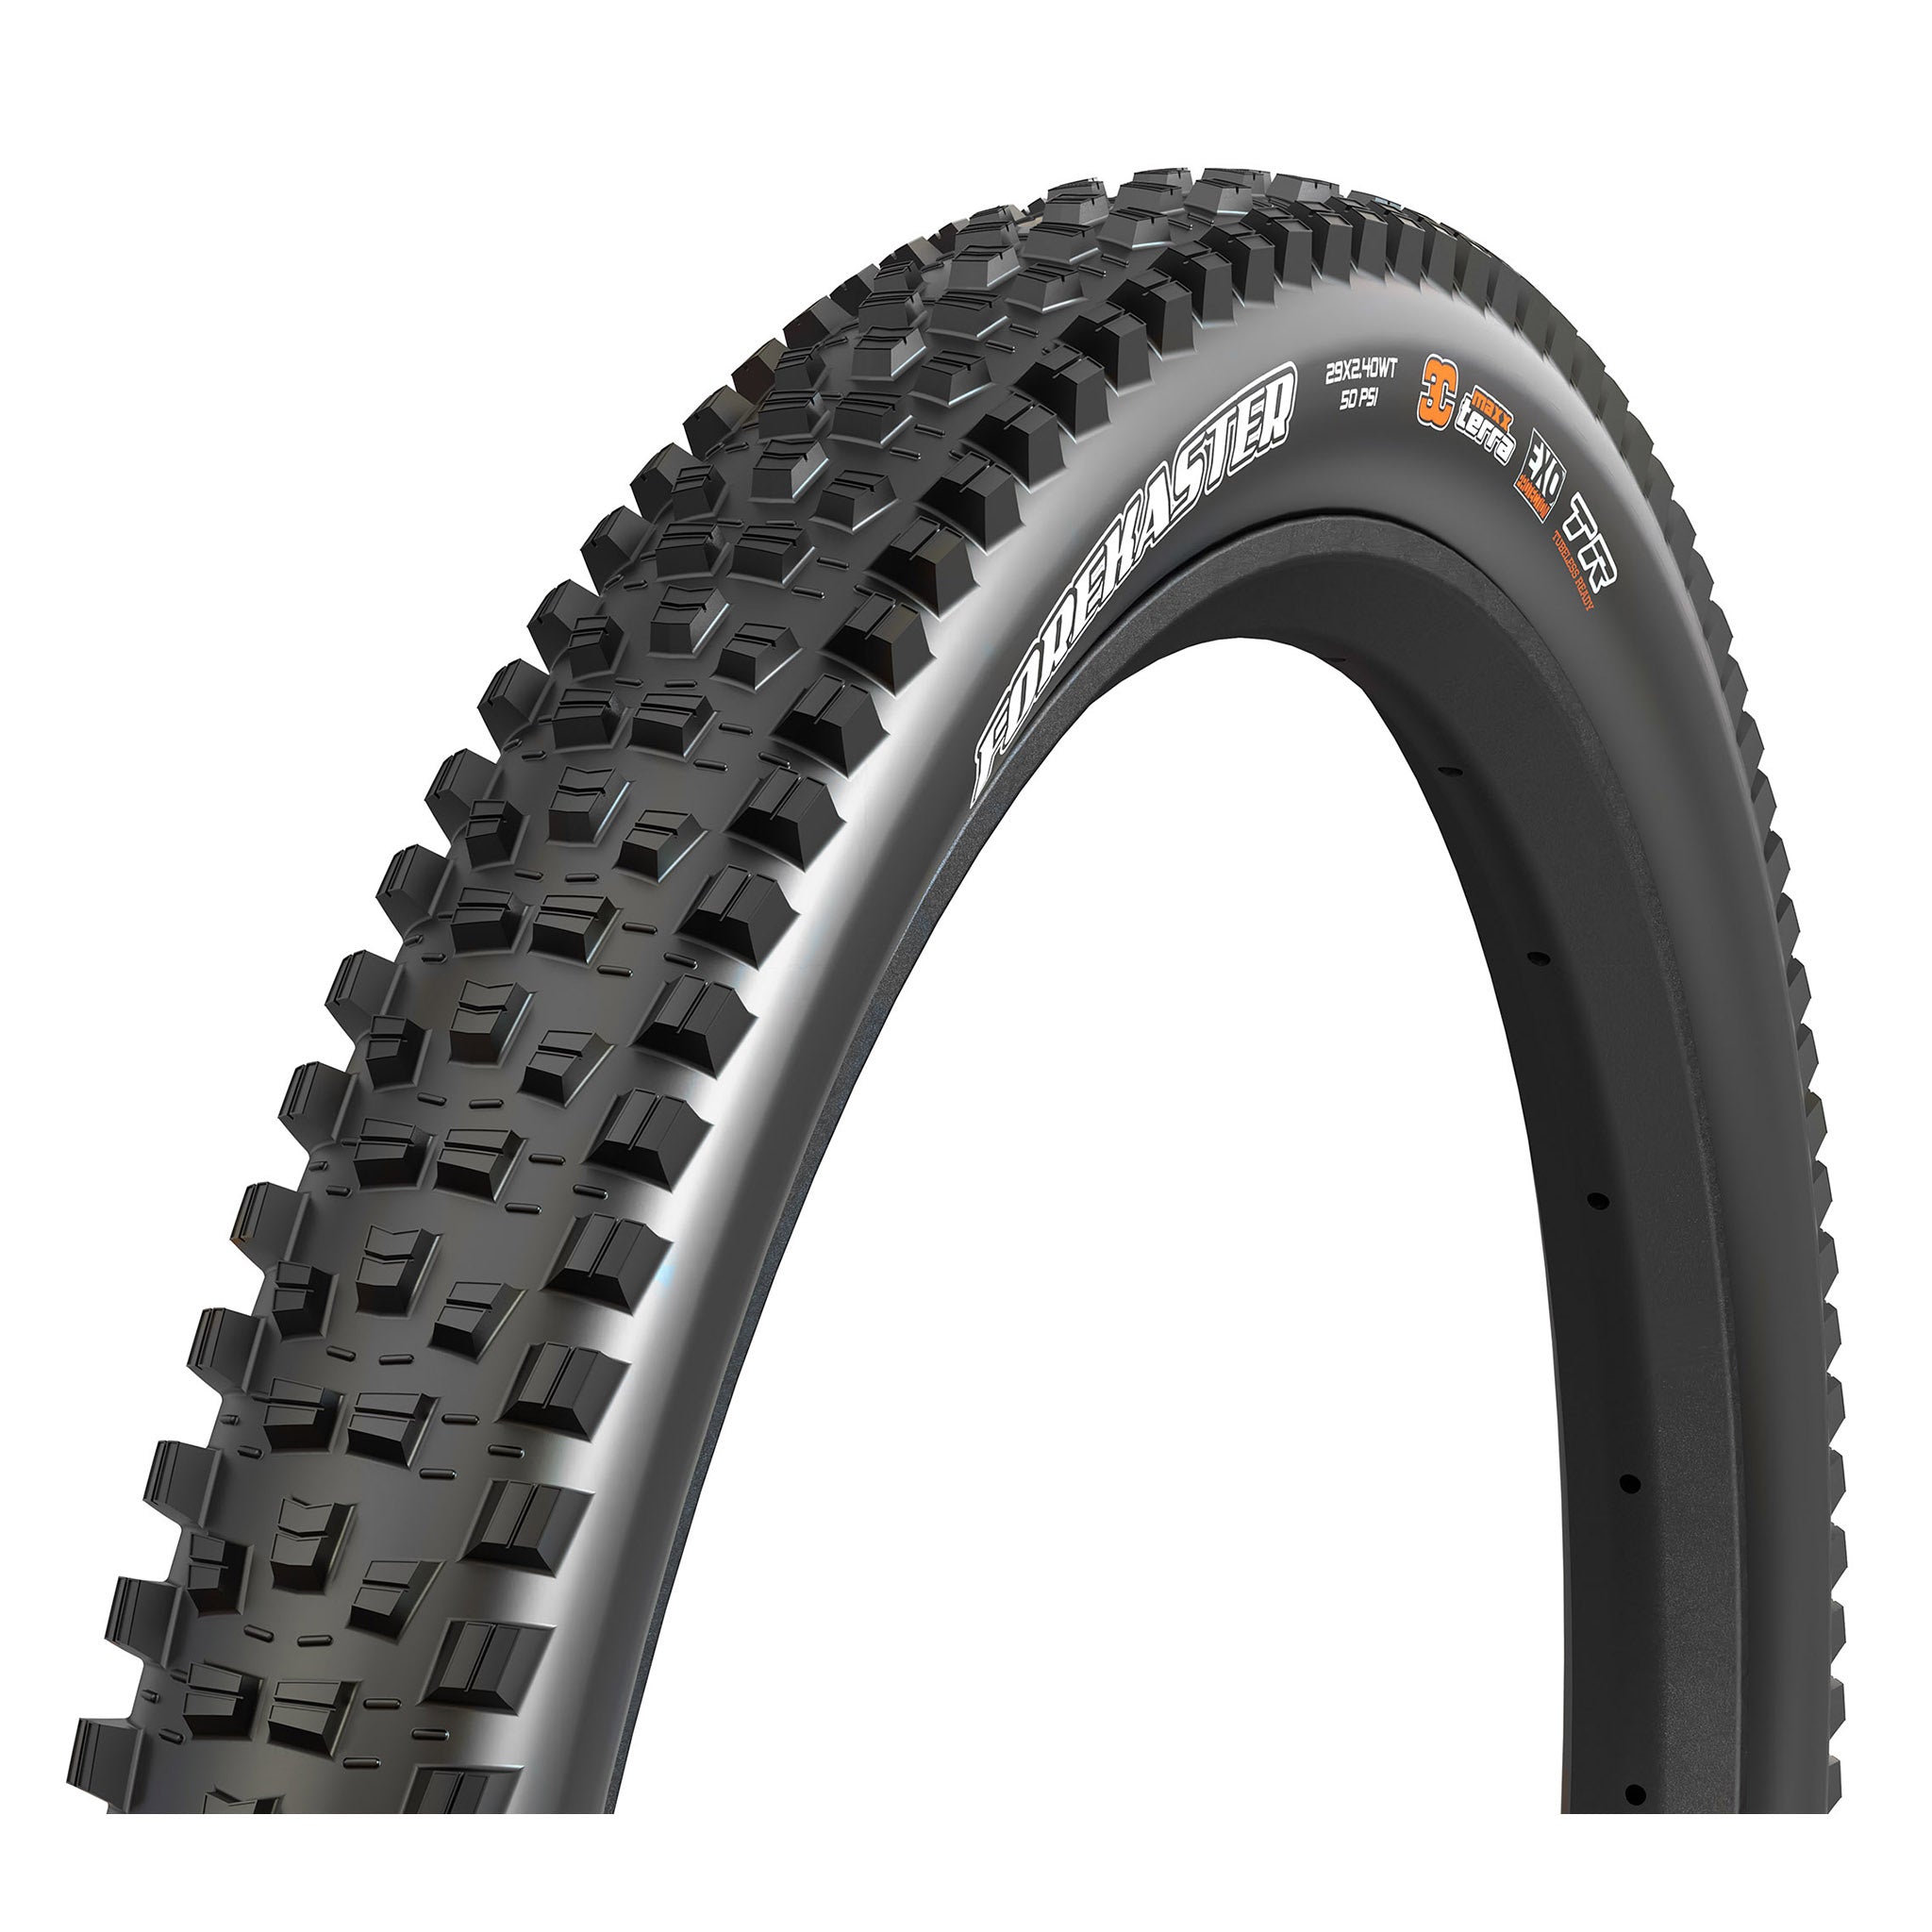 Maxxis Forekaster Tire - 27.5 x 2.4 Tubeless Folding Black EXO Wide Trail